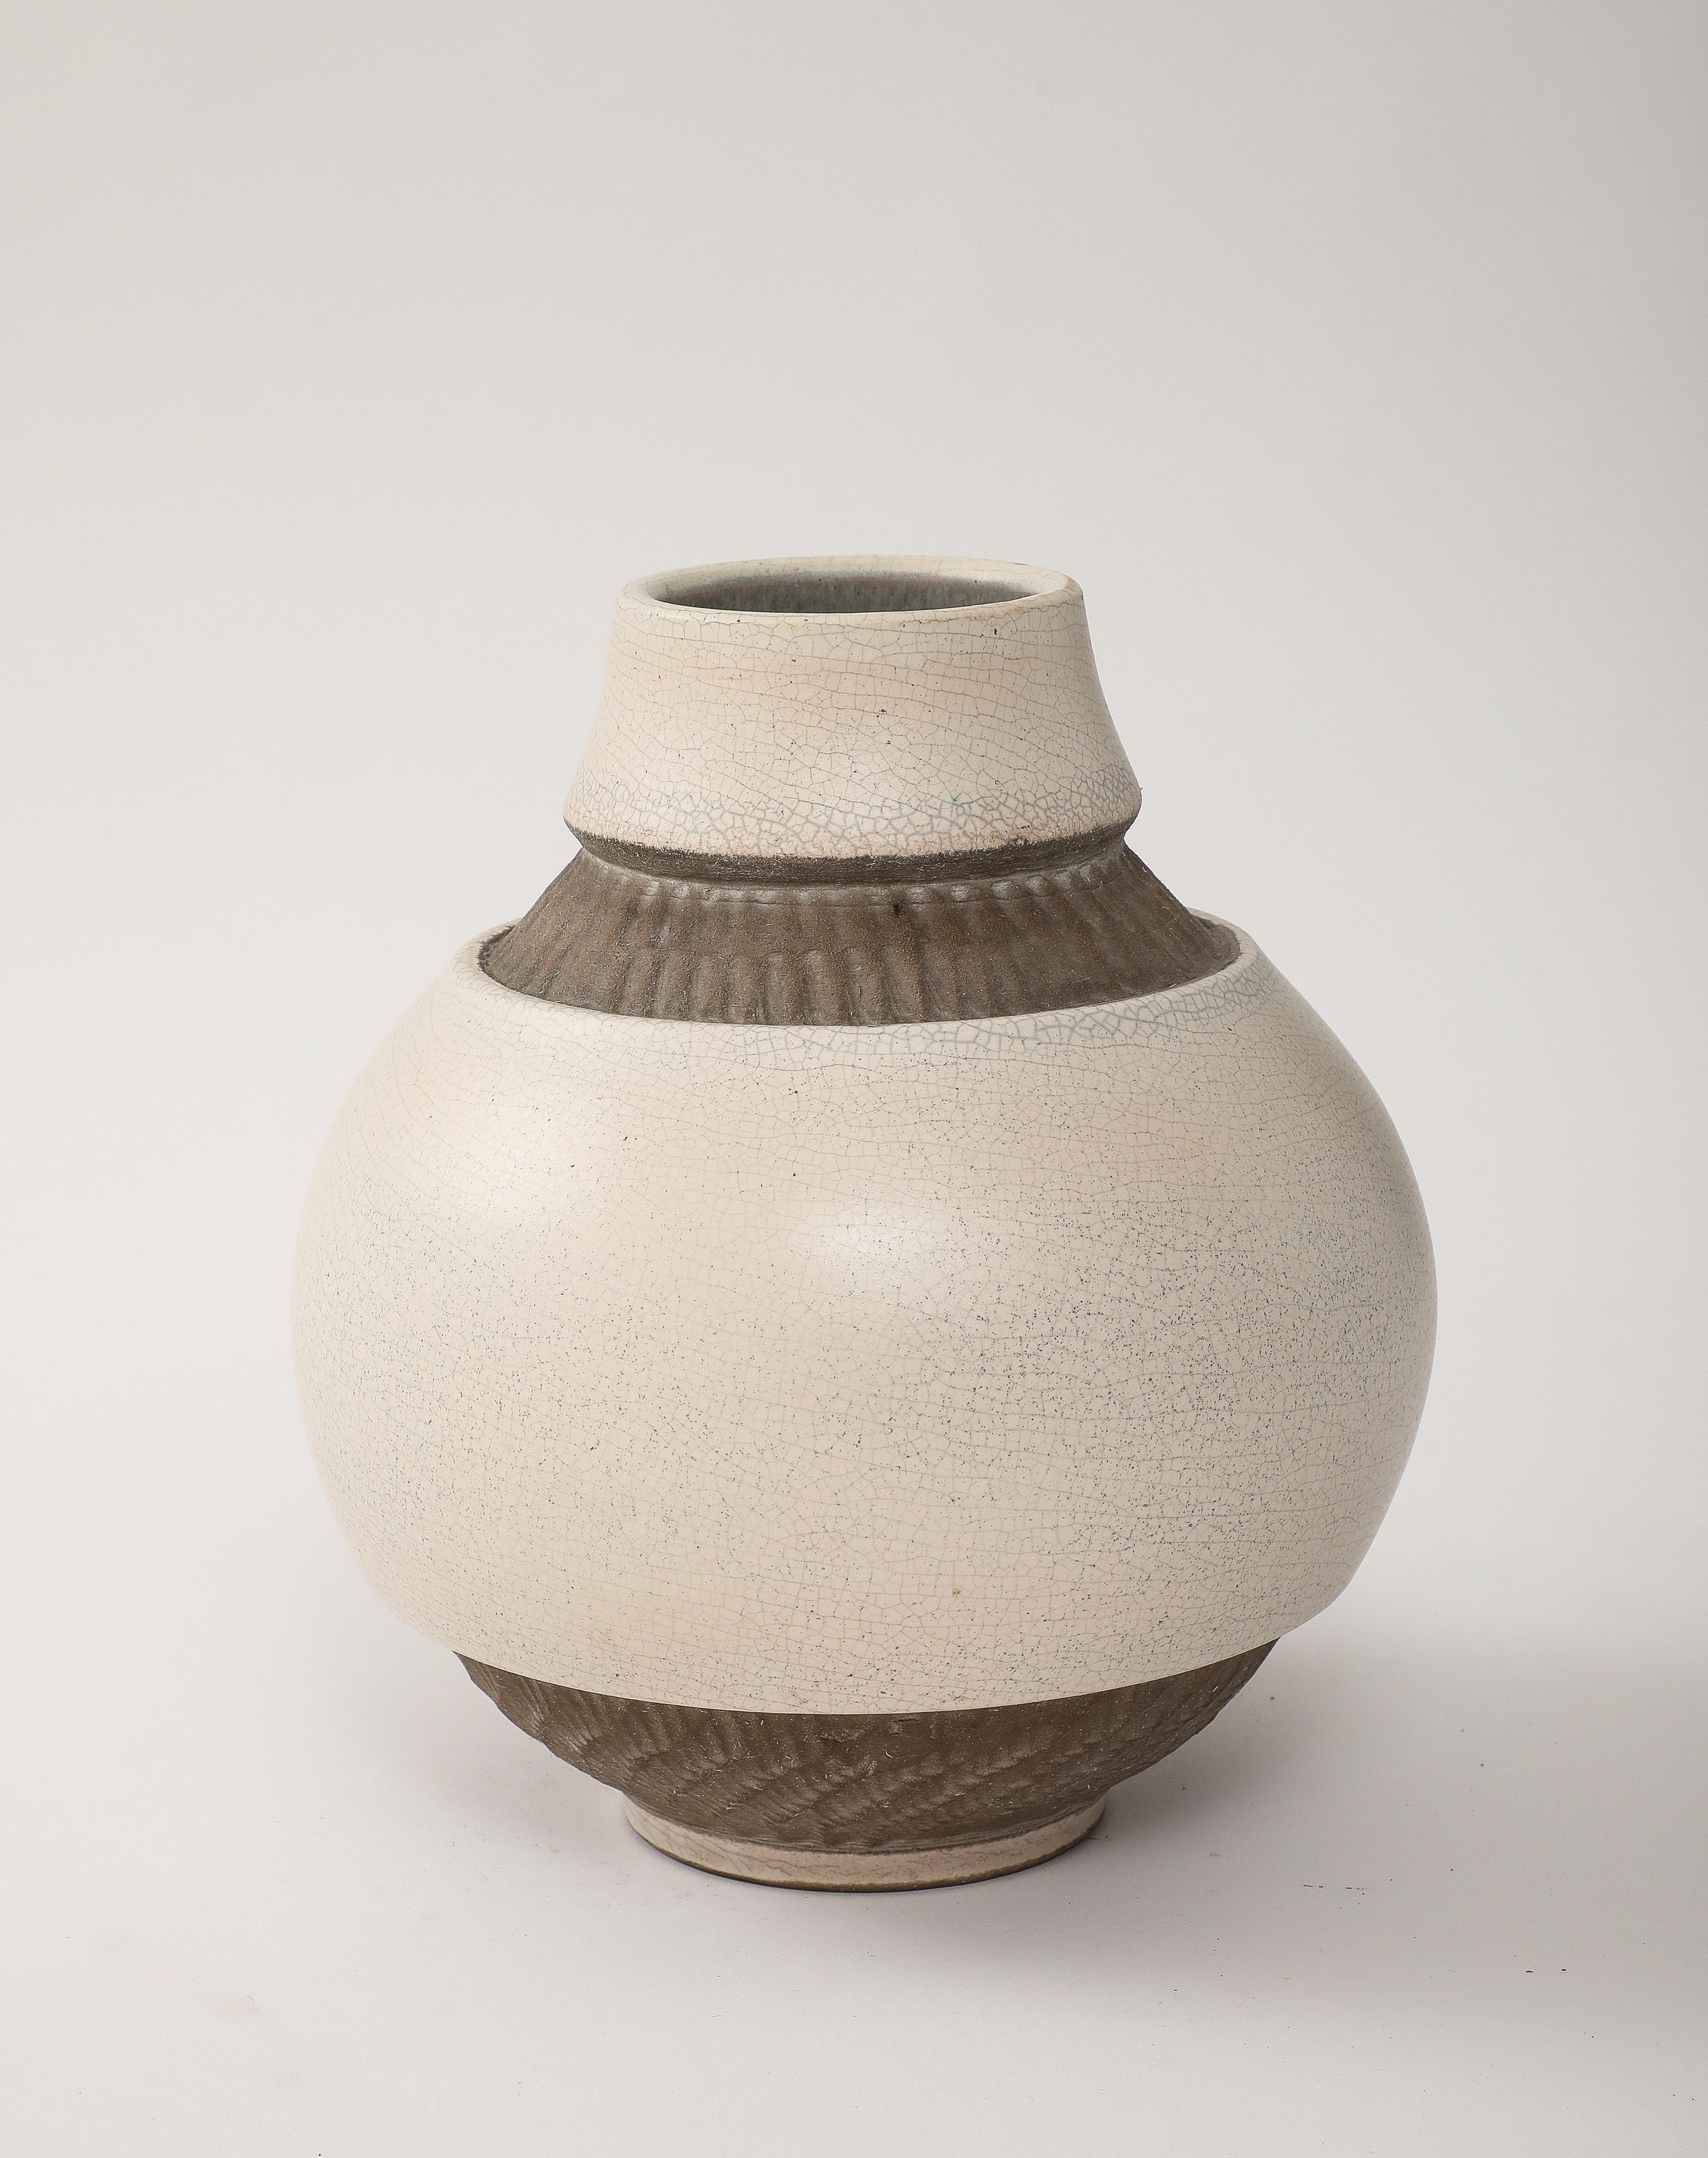 Large Off White Crackle Vase with African inspired incised brown bands, stamped: 'Made in France'
